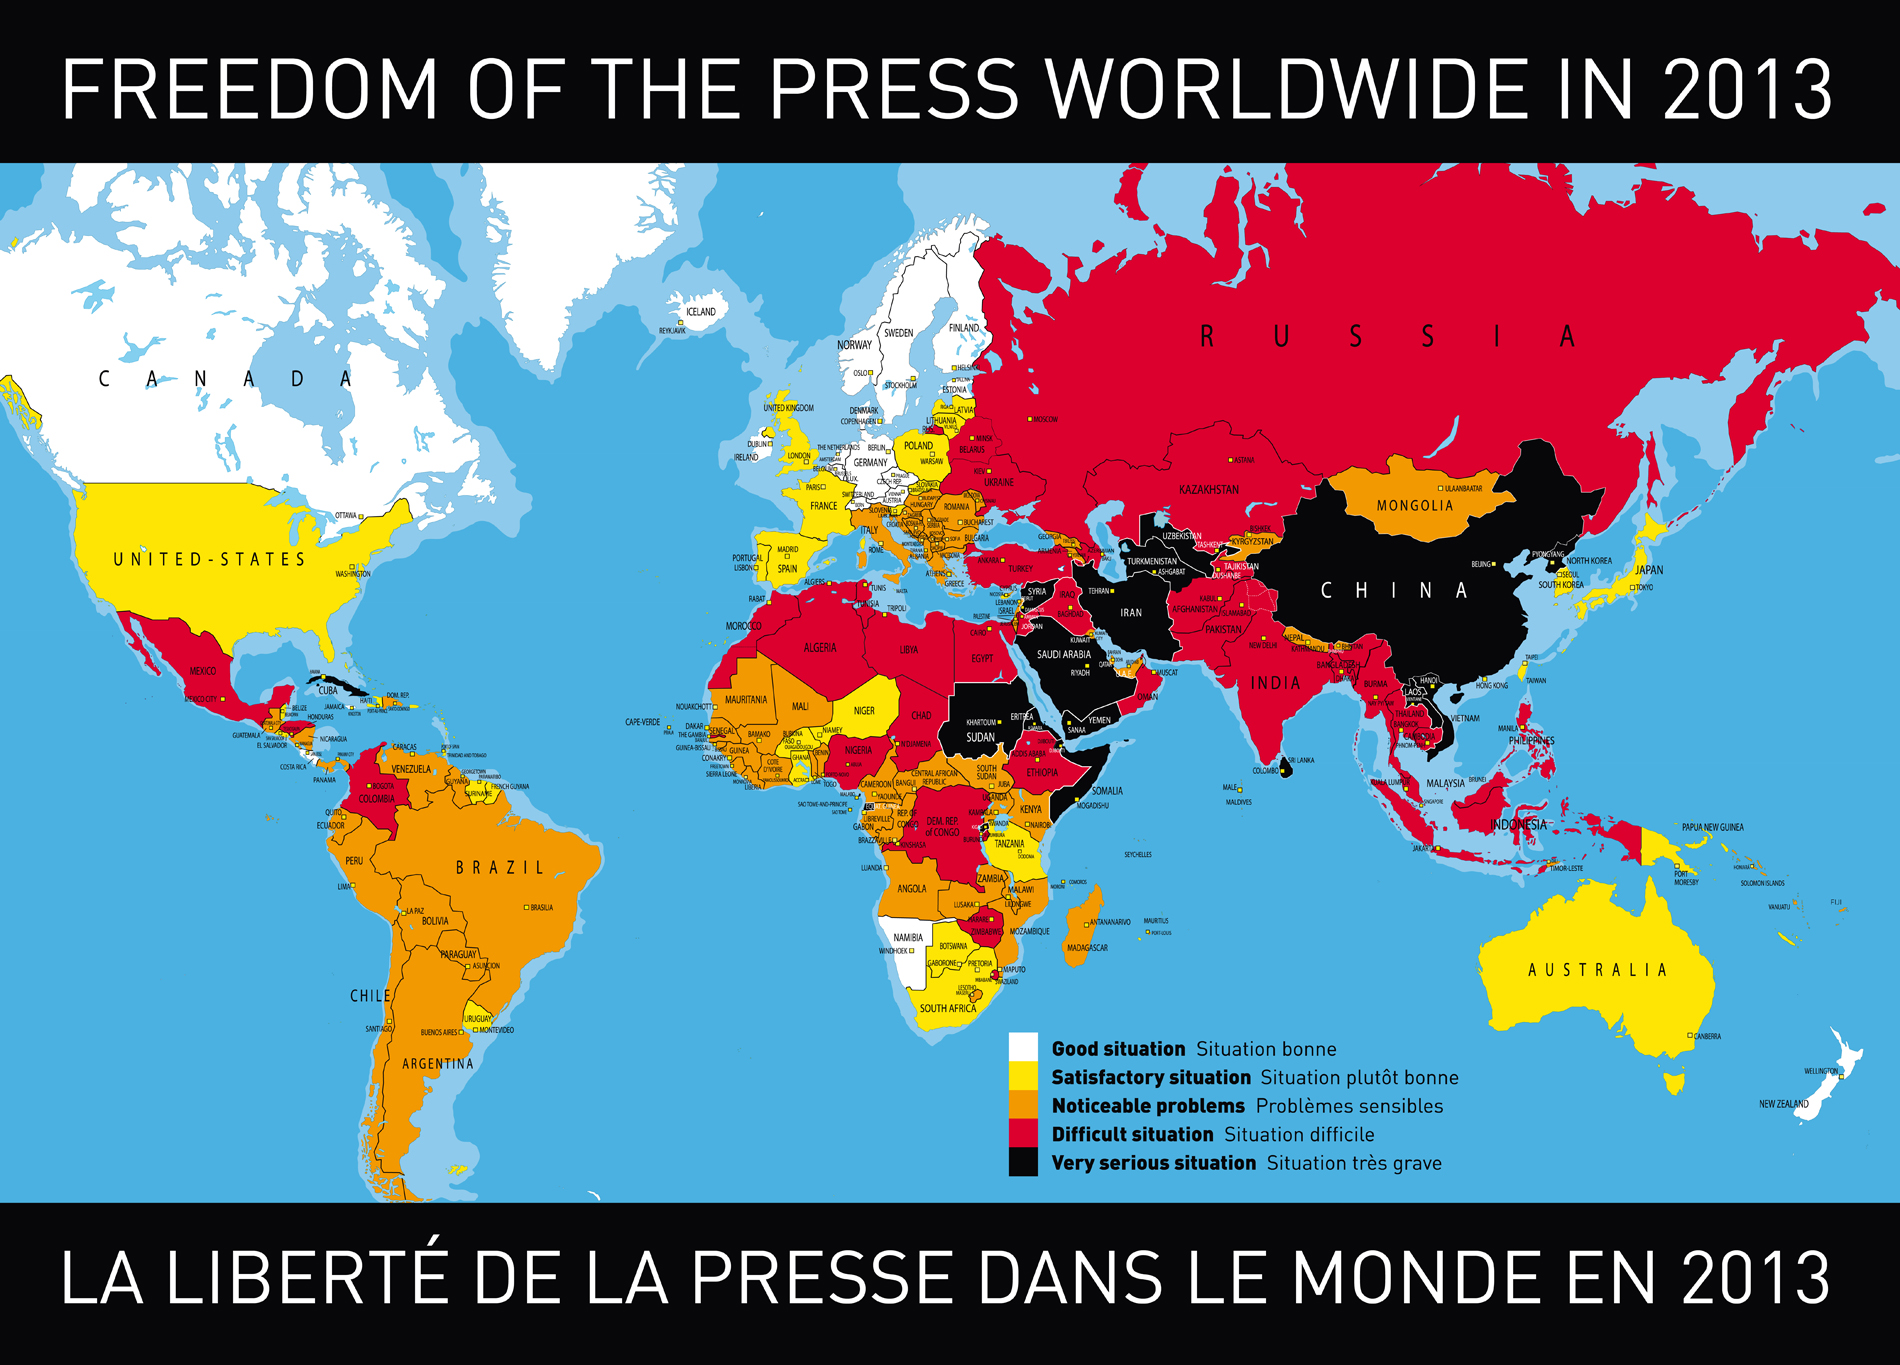 Freedom-of-the-press-worldwide-in-2013. Source: Reporters without Borders on facebook